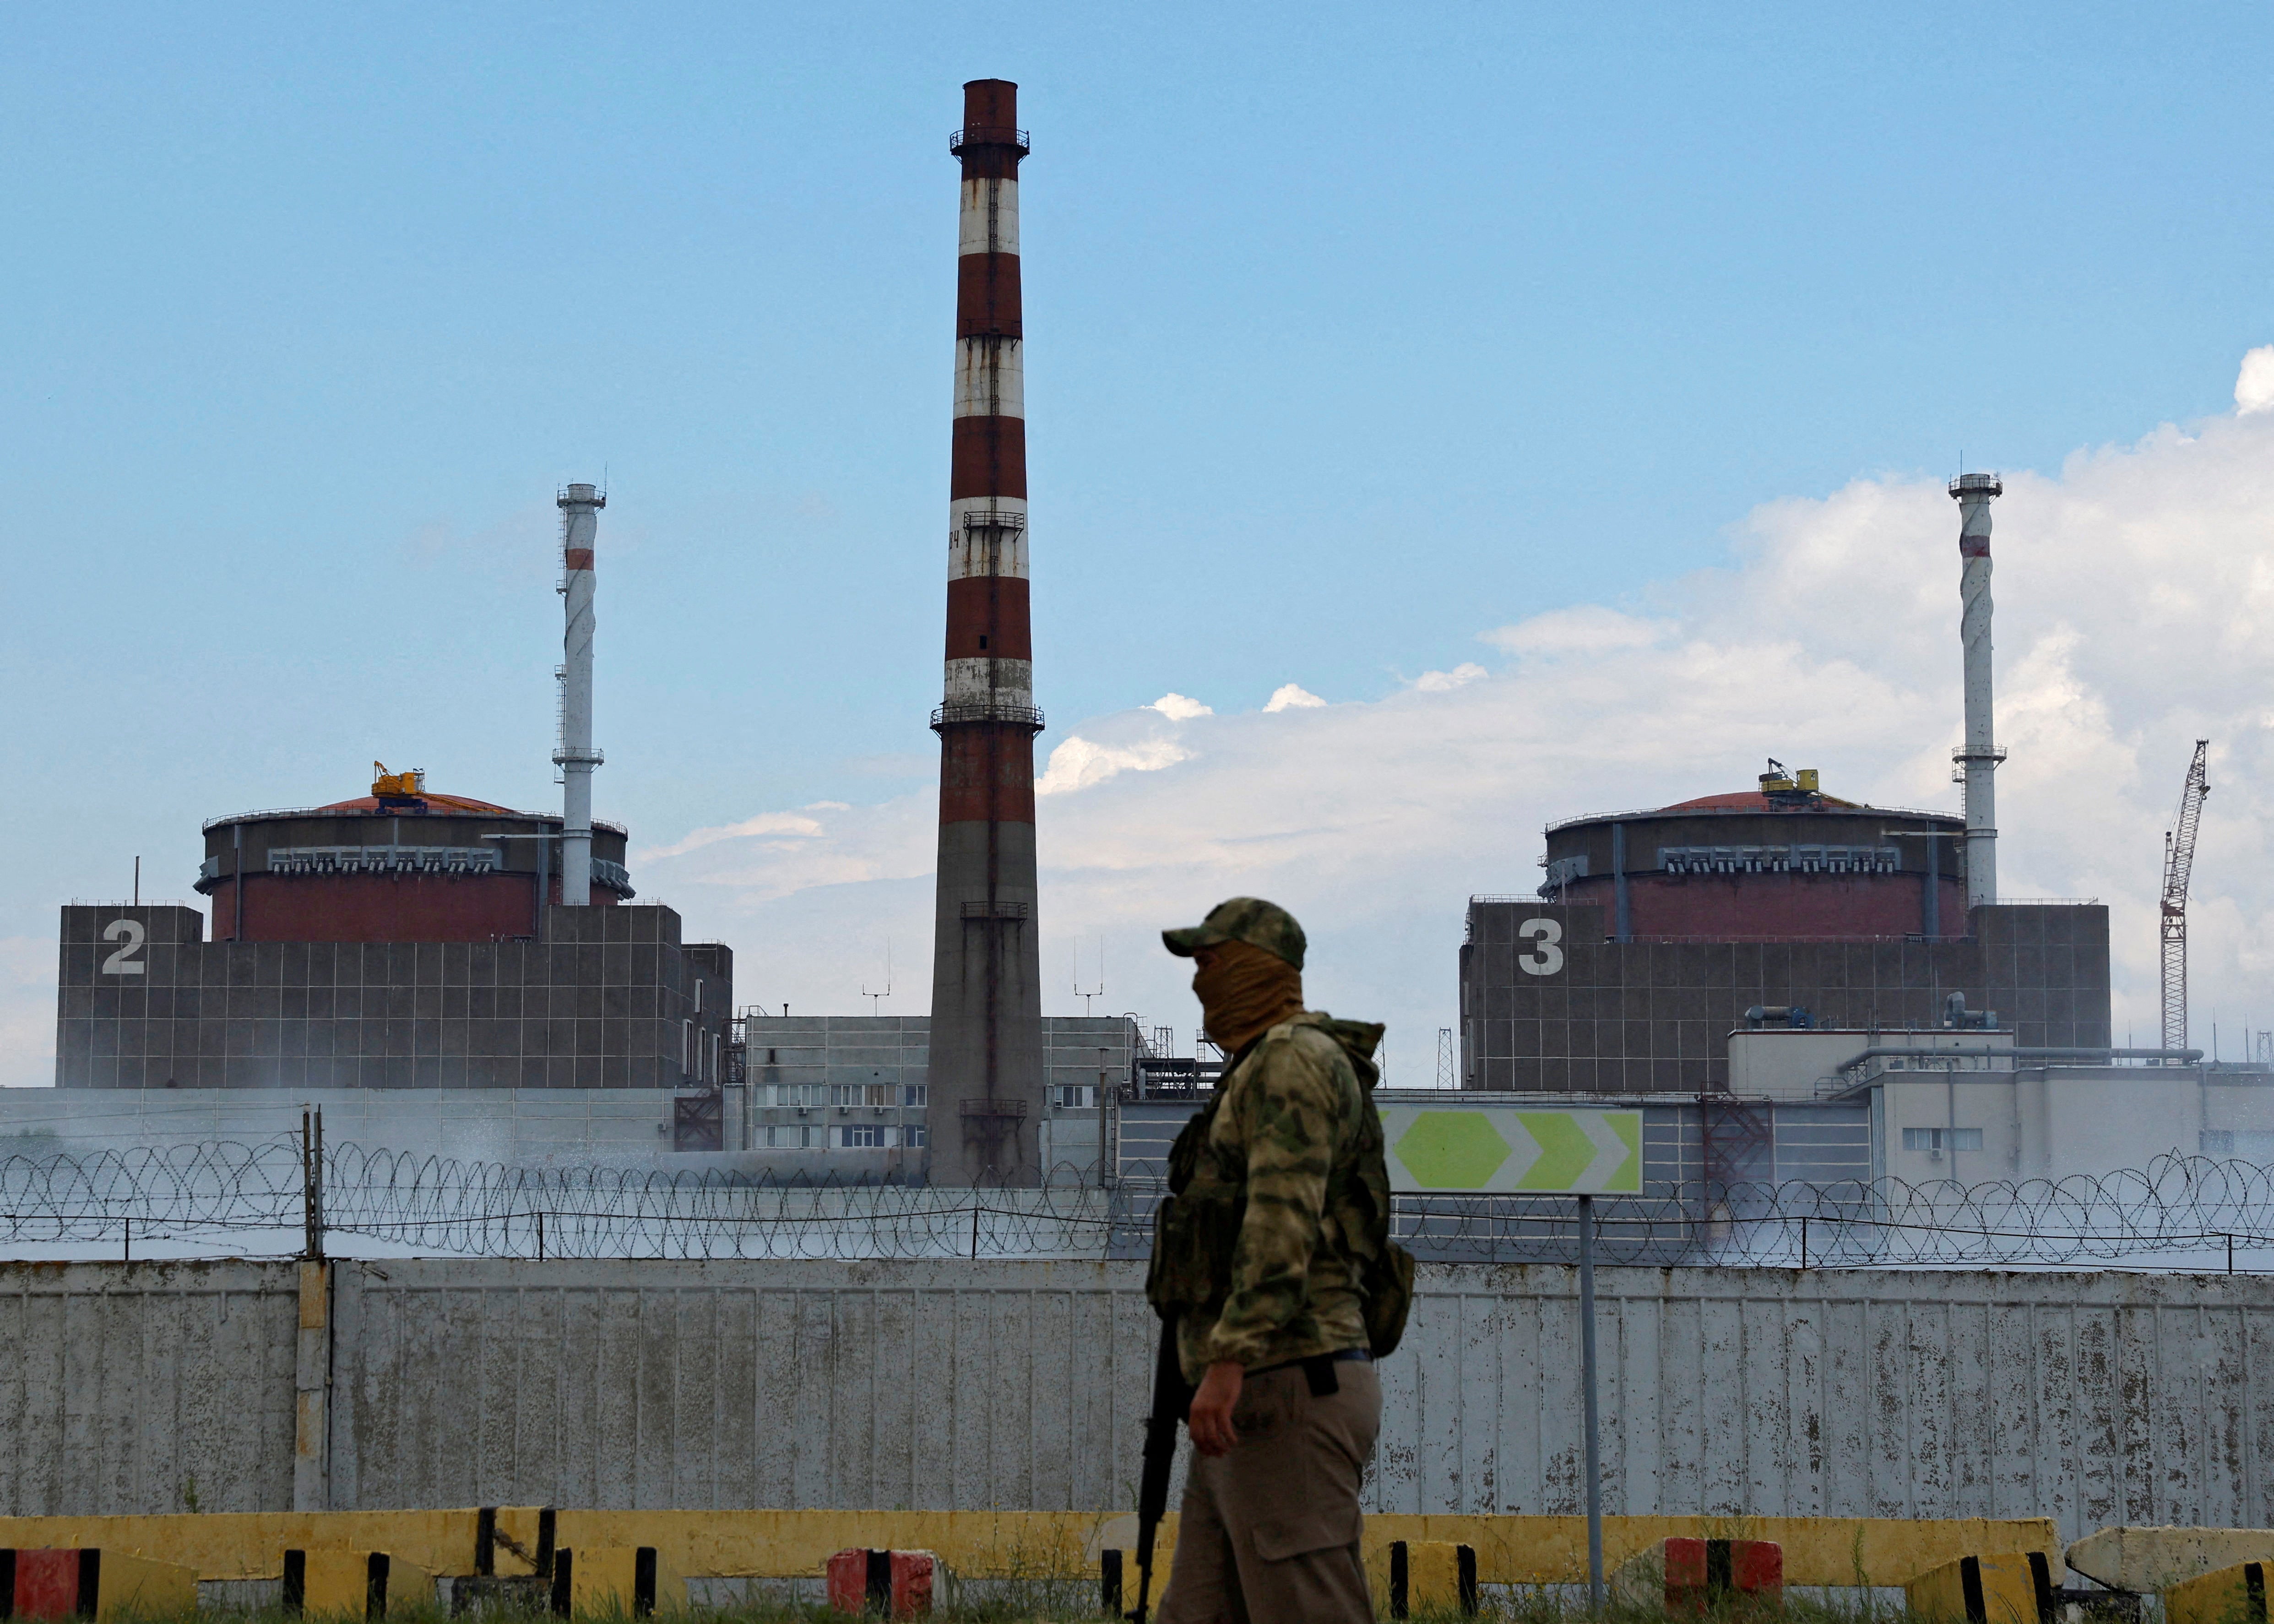 A serviceman with a Russian flag on his uniform stands guard near the Zaporizhzhia plant